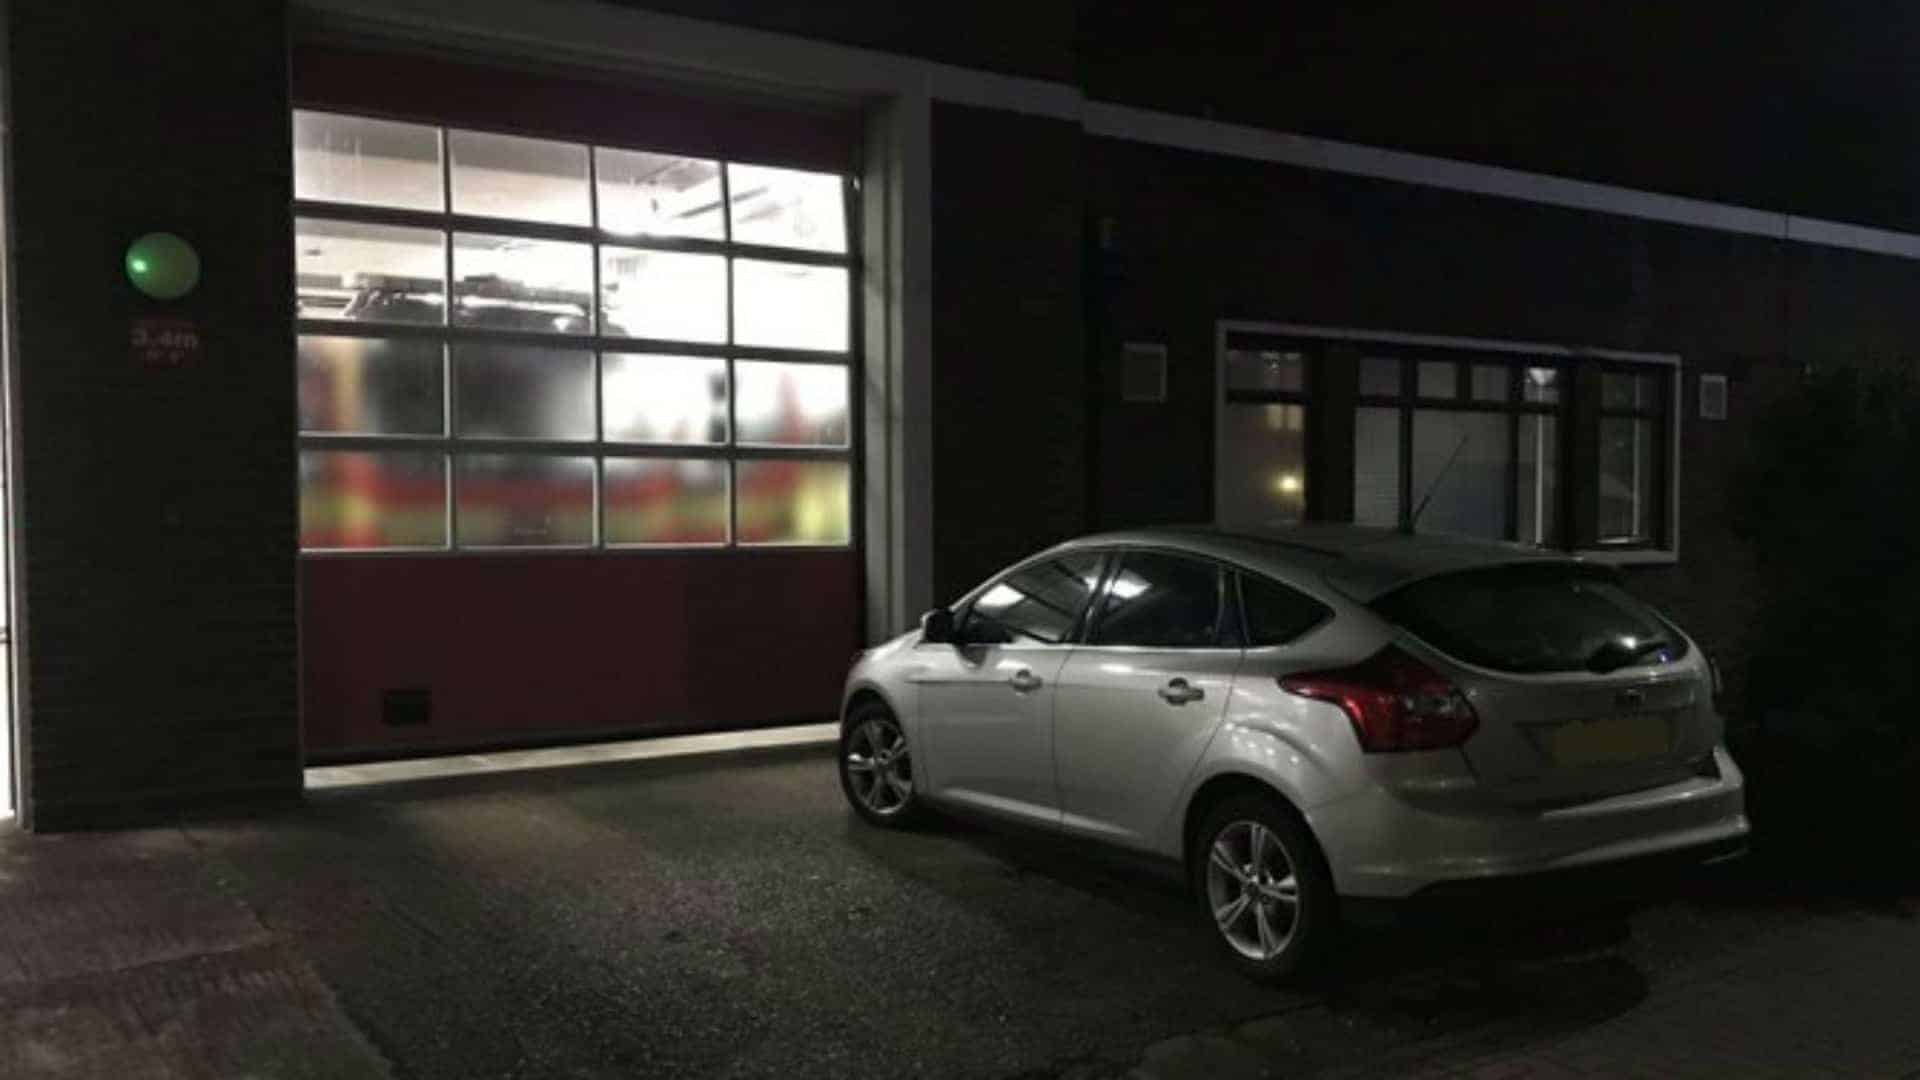 Driver condemned for ‘mindless parking’ in front of fire station doors